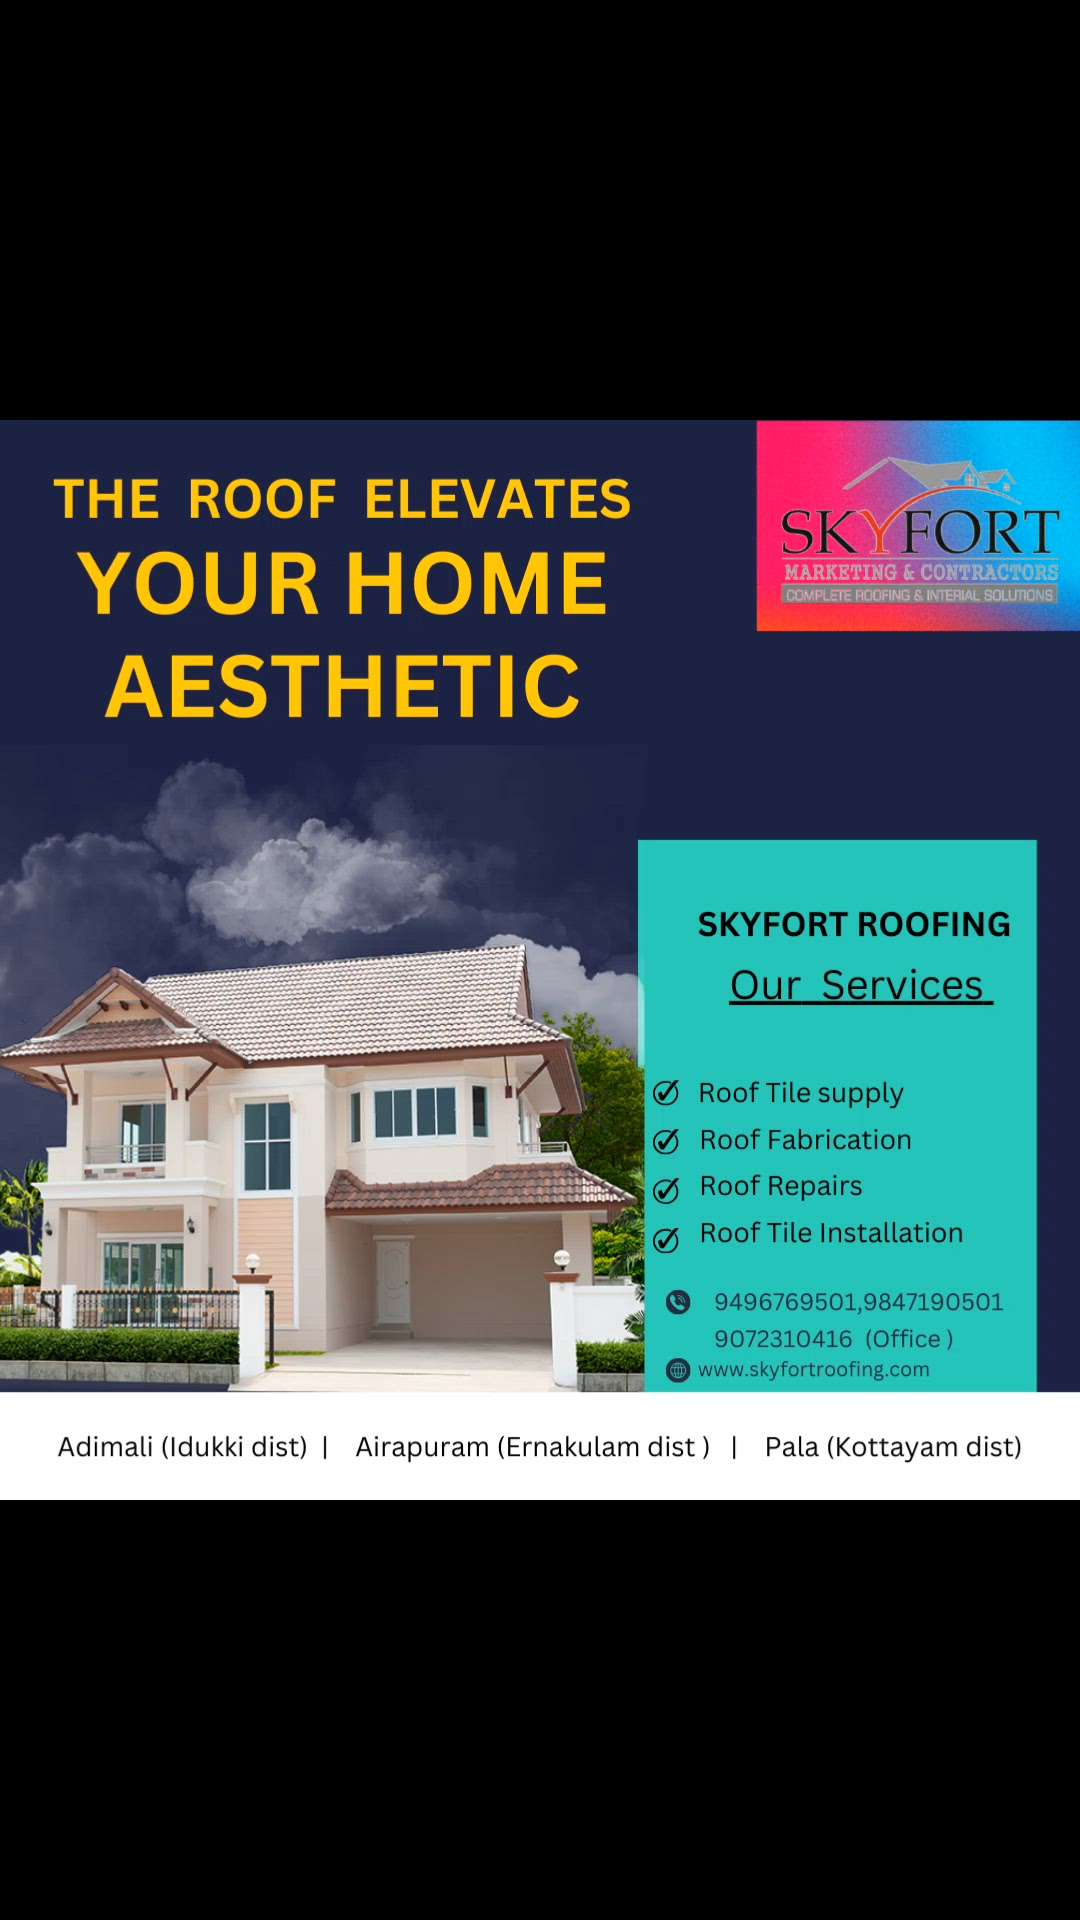 Contact :-
@skyfortroofing

🌏 www.skyfortroofing.com

📞98471 90501

    -94967 69501

     9072310416 (Office)

📩info@skyfortroofing.com


.
.
.
.
....






.
.
.
#roofing #rooftop #roofing contractor #roofingcompany #roofingservices #roofingsolutions #roofingkerala #ernakulam #kochi #perumbavoor #kerlaroof #keralaroofing #keralanewhome #newconstructionhomes #newconstruction #keralaconstruction #sky #Skyfort #skyfortroofing #allkerala #all #keraladelivery #alldelivery